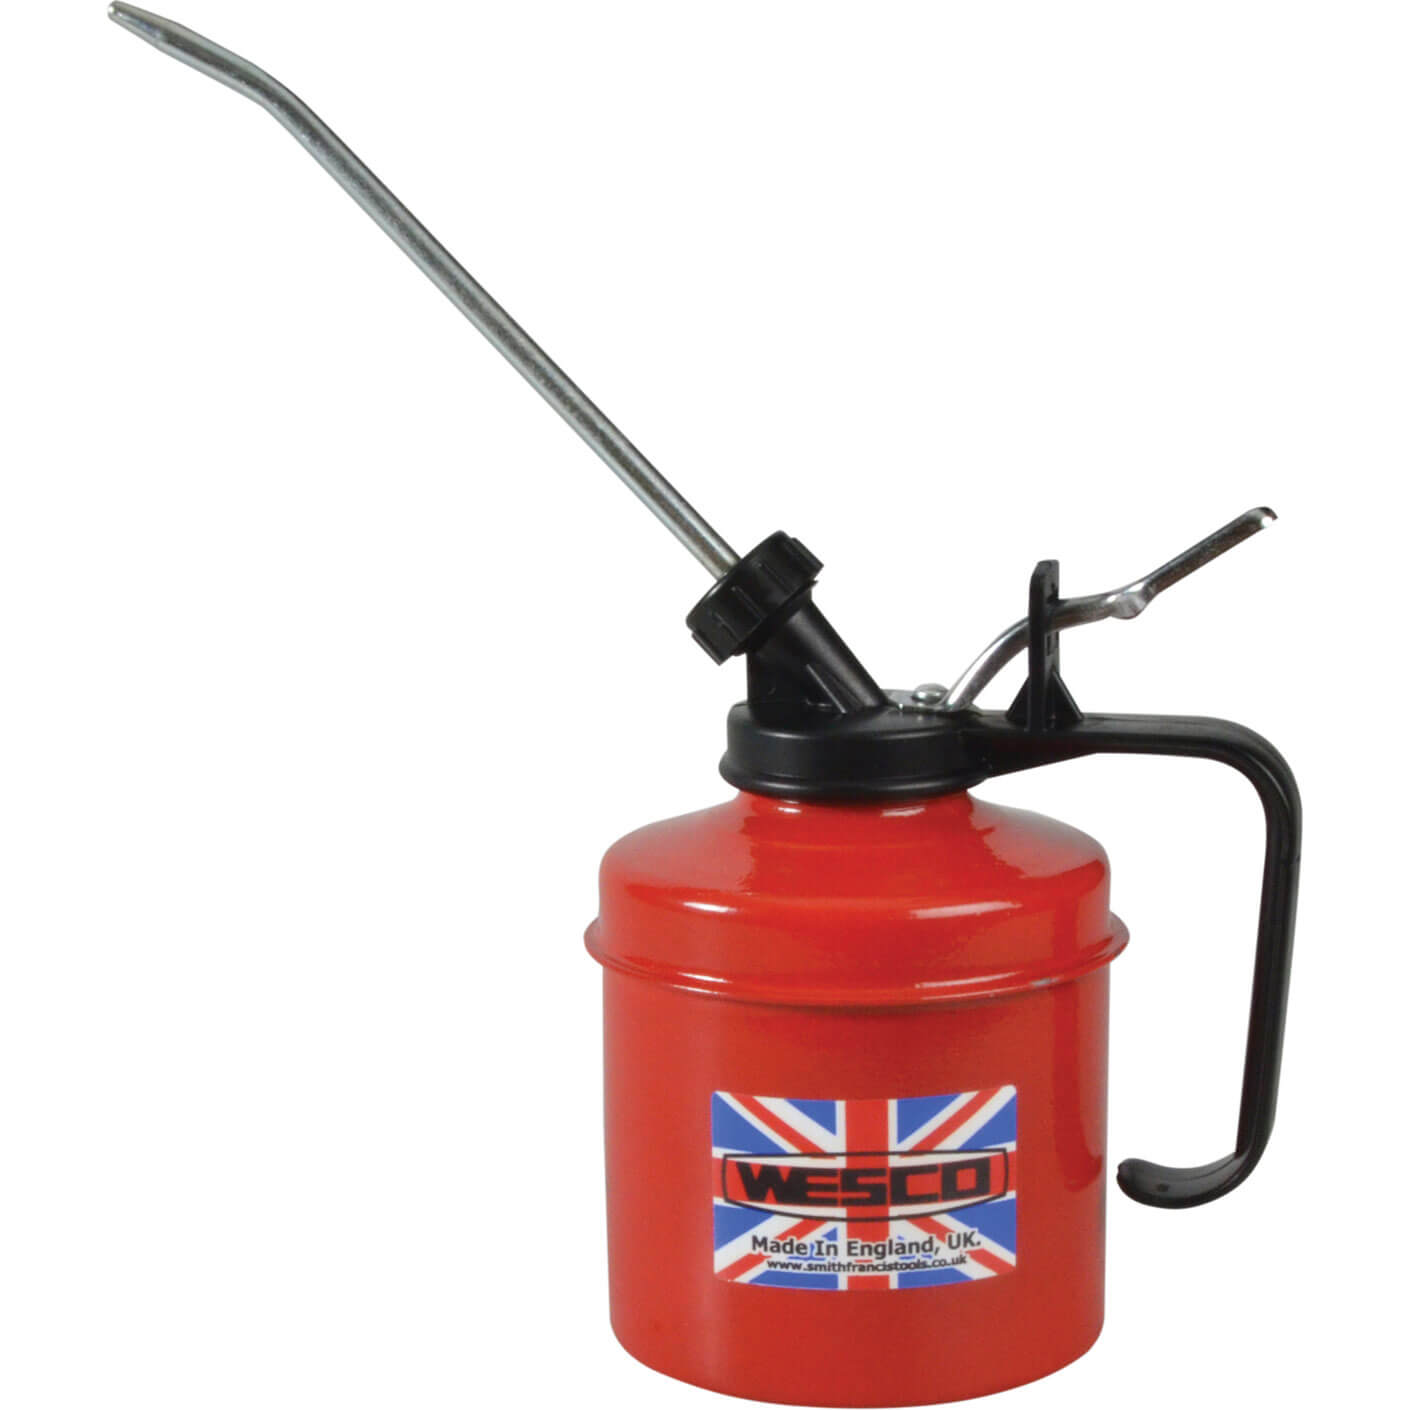 Photos - Car Service Station Equipment Wesco Metal Oil Can and Metal Spout 500ml 3320 